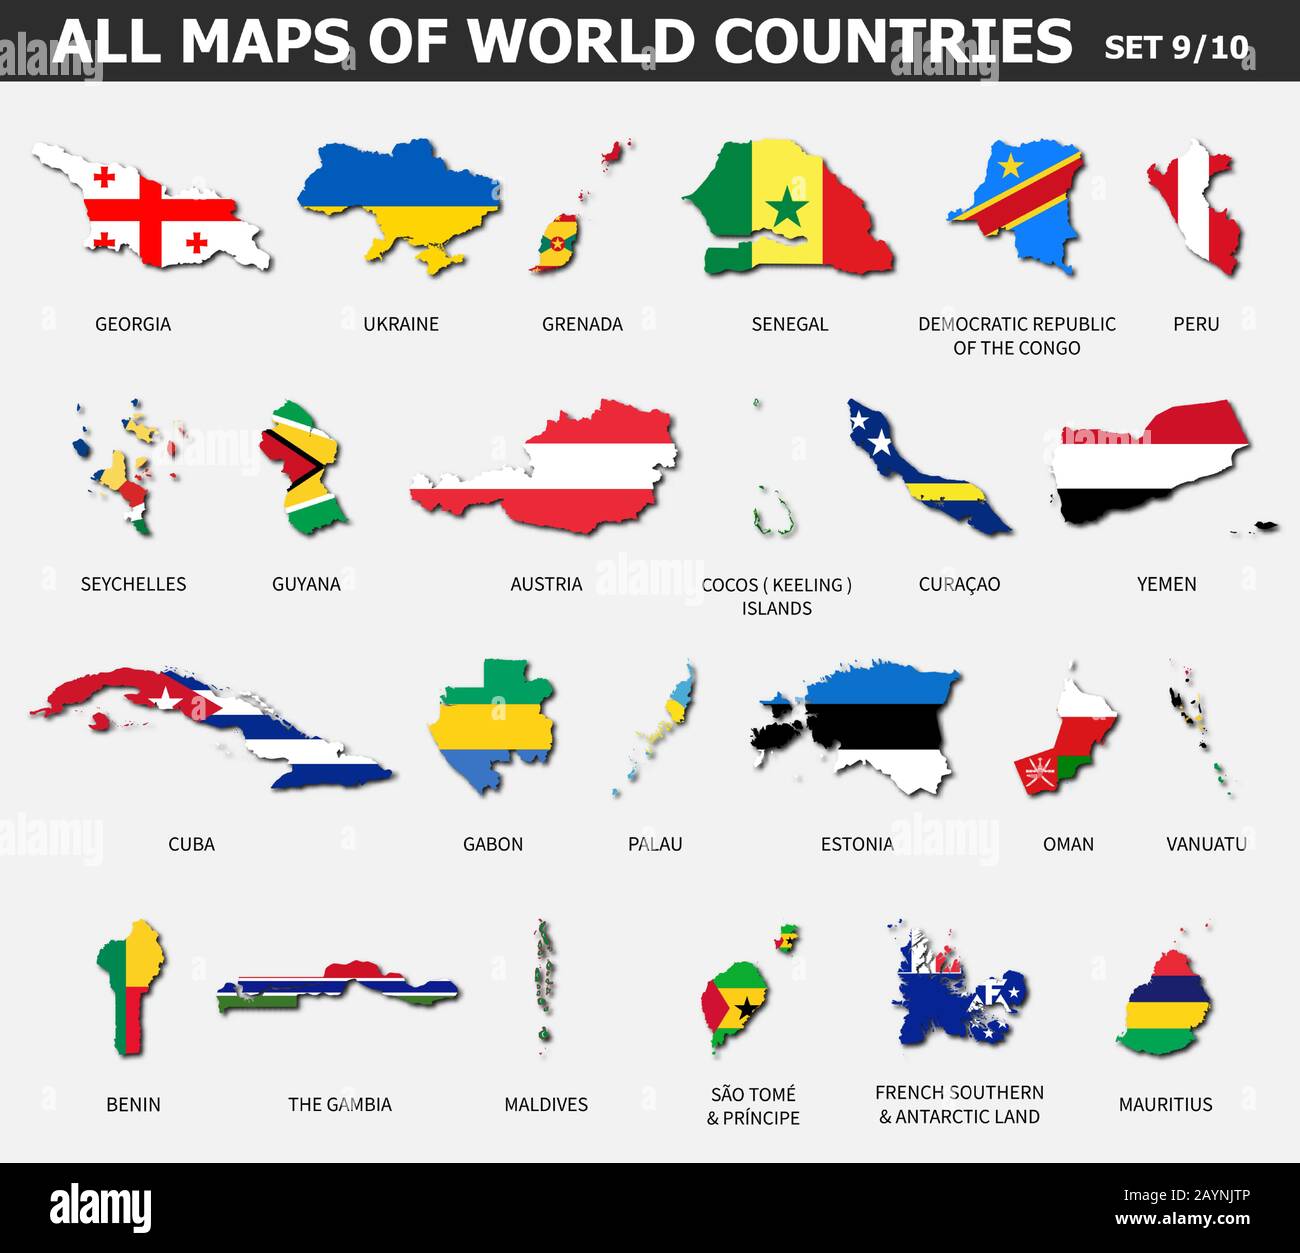 All maps of world countries and flags . Set 9 of 10 . Collection of ...